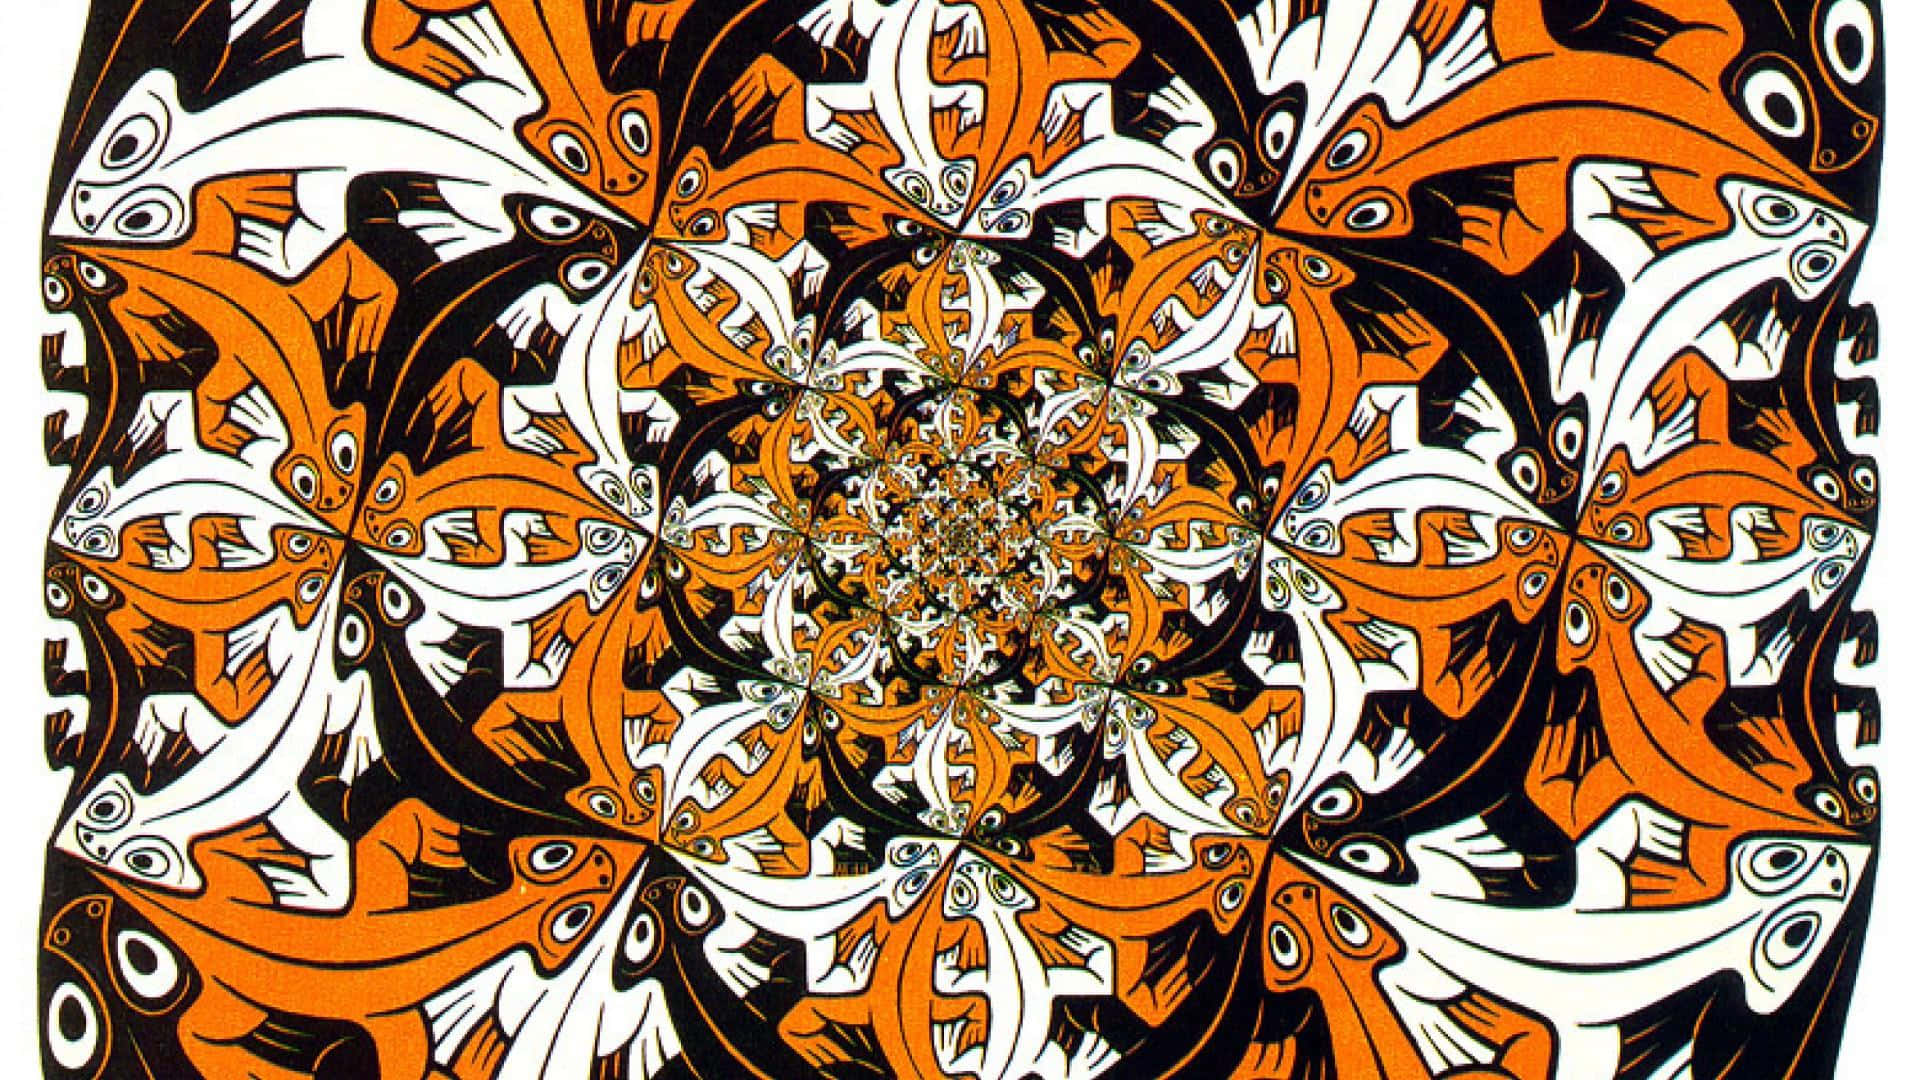 A Mandala With Orange And White Designs